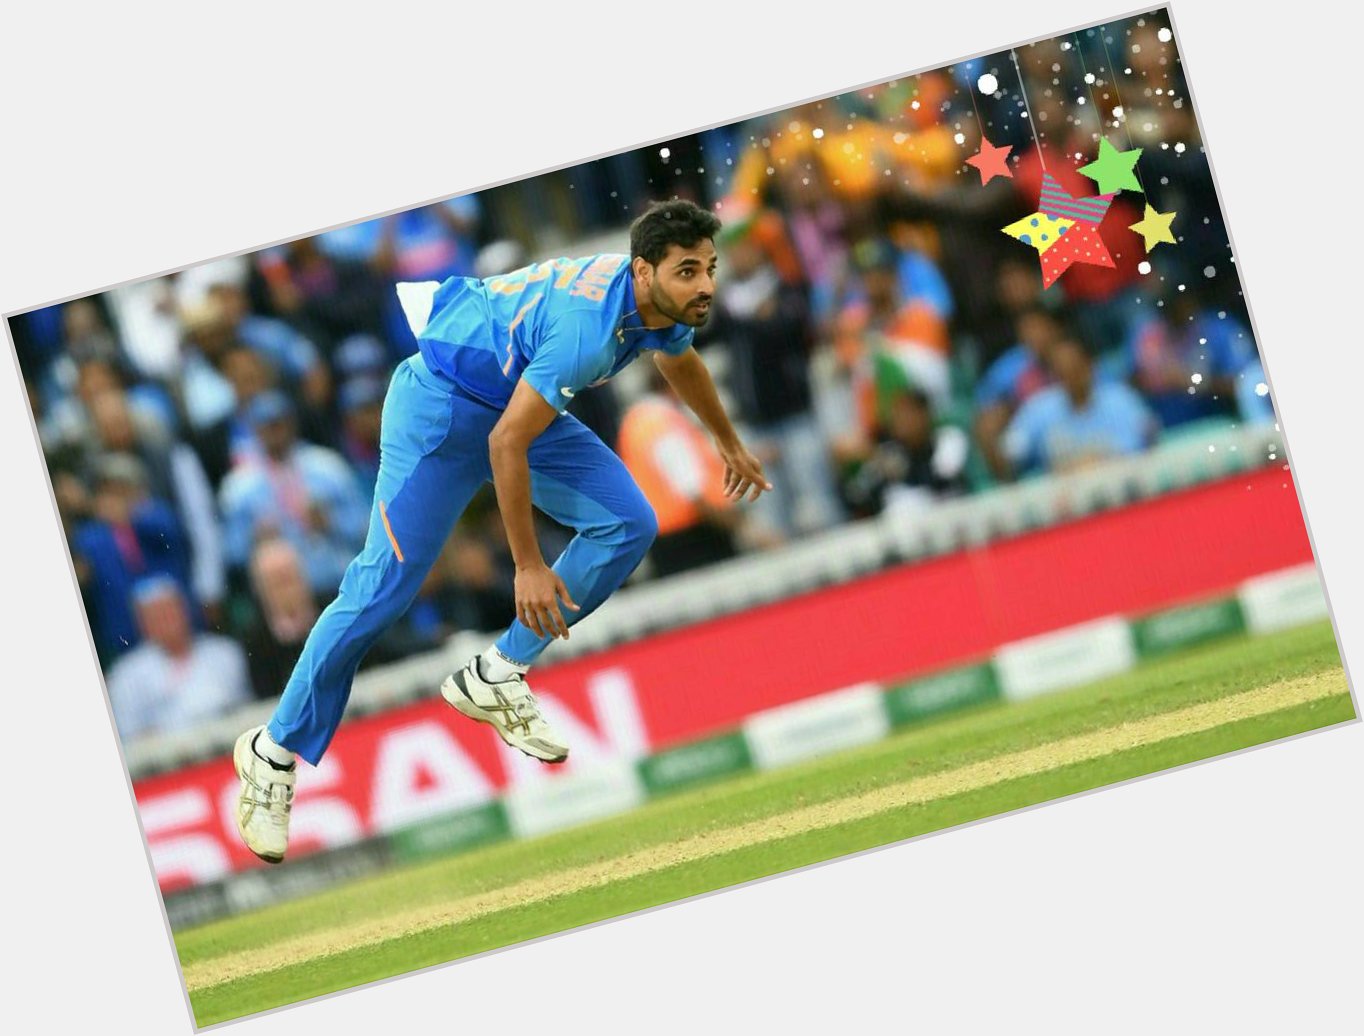   236 wickets for India! 136 wickets in the IPL! A lot more to come! 

Happy Birthday, Bhuvneshwar Kumar! 